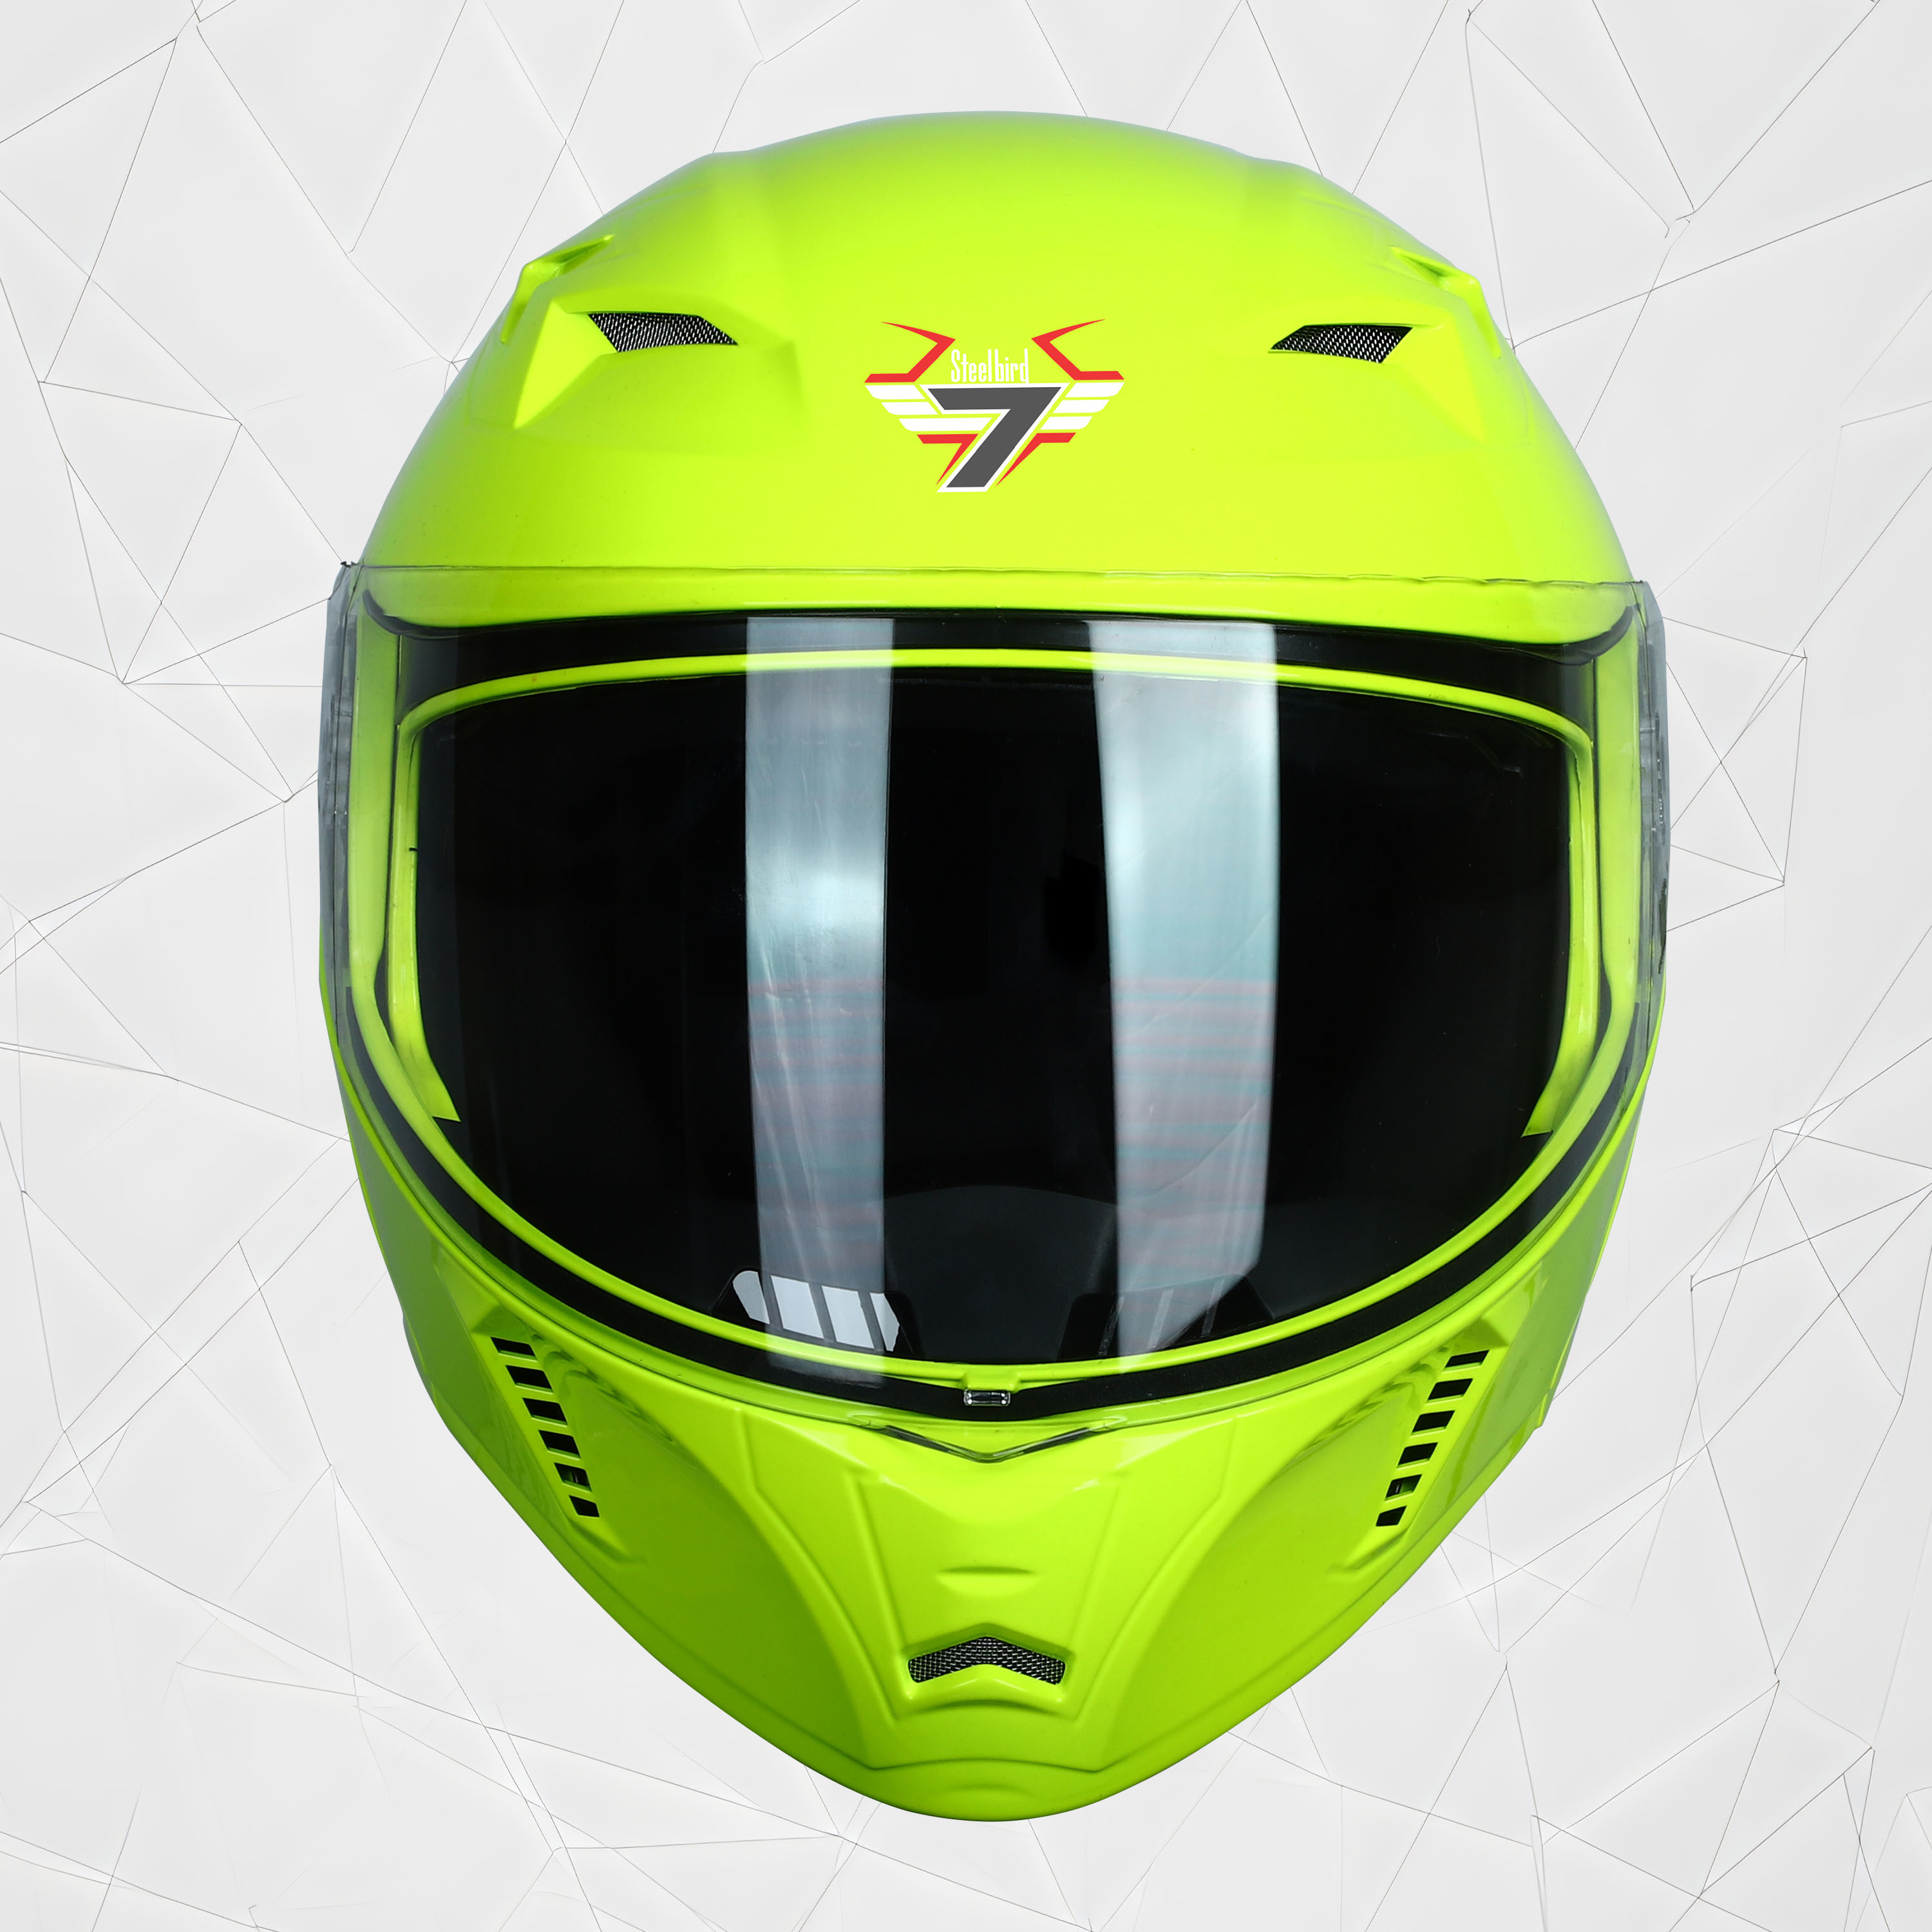 Steelbird SBA-20 7Wings ISI Certified Flip-Up Helmet With Black Spoiler For Men And Women (Glossy Fluo Neon With Clear Visor)